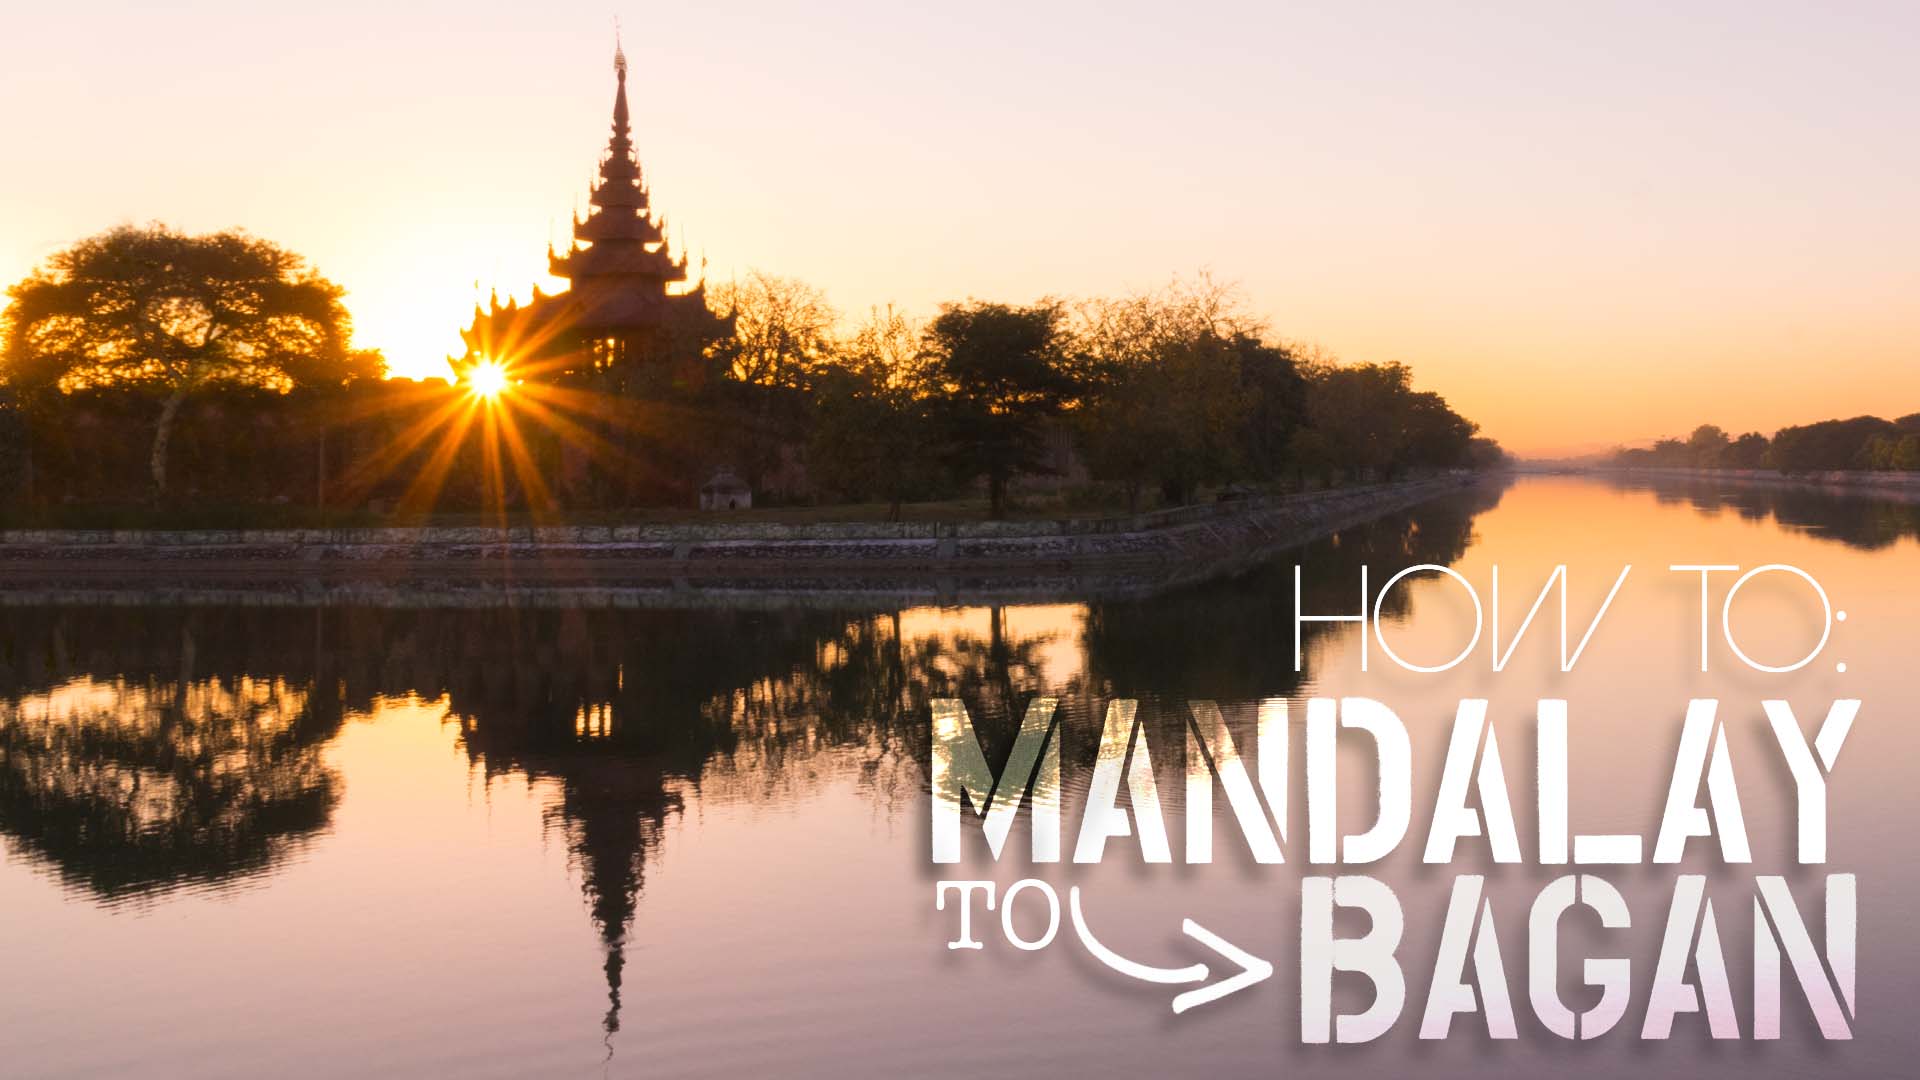 Mandalay to Bagan transportation guide and options - sunset over Mandalay feature